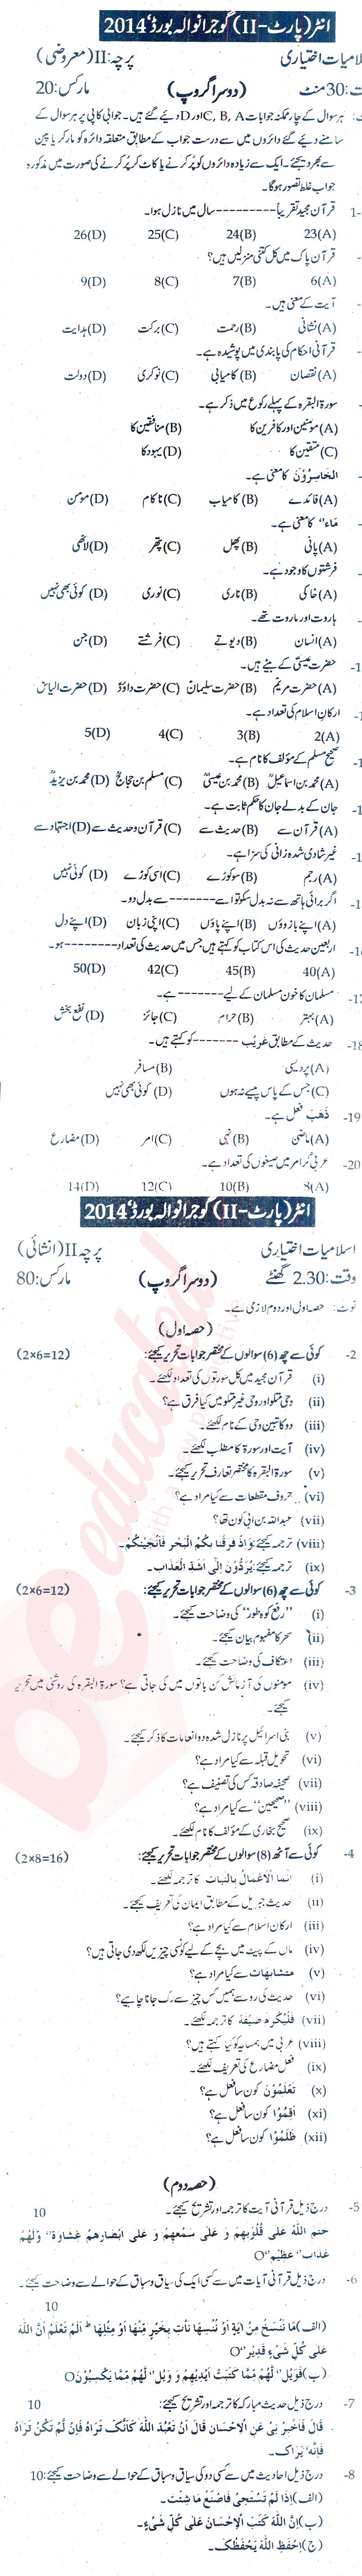 Islamiat Elective FA Part 2 Past Paper Group 2 BISE Gujranwala 2014